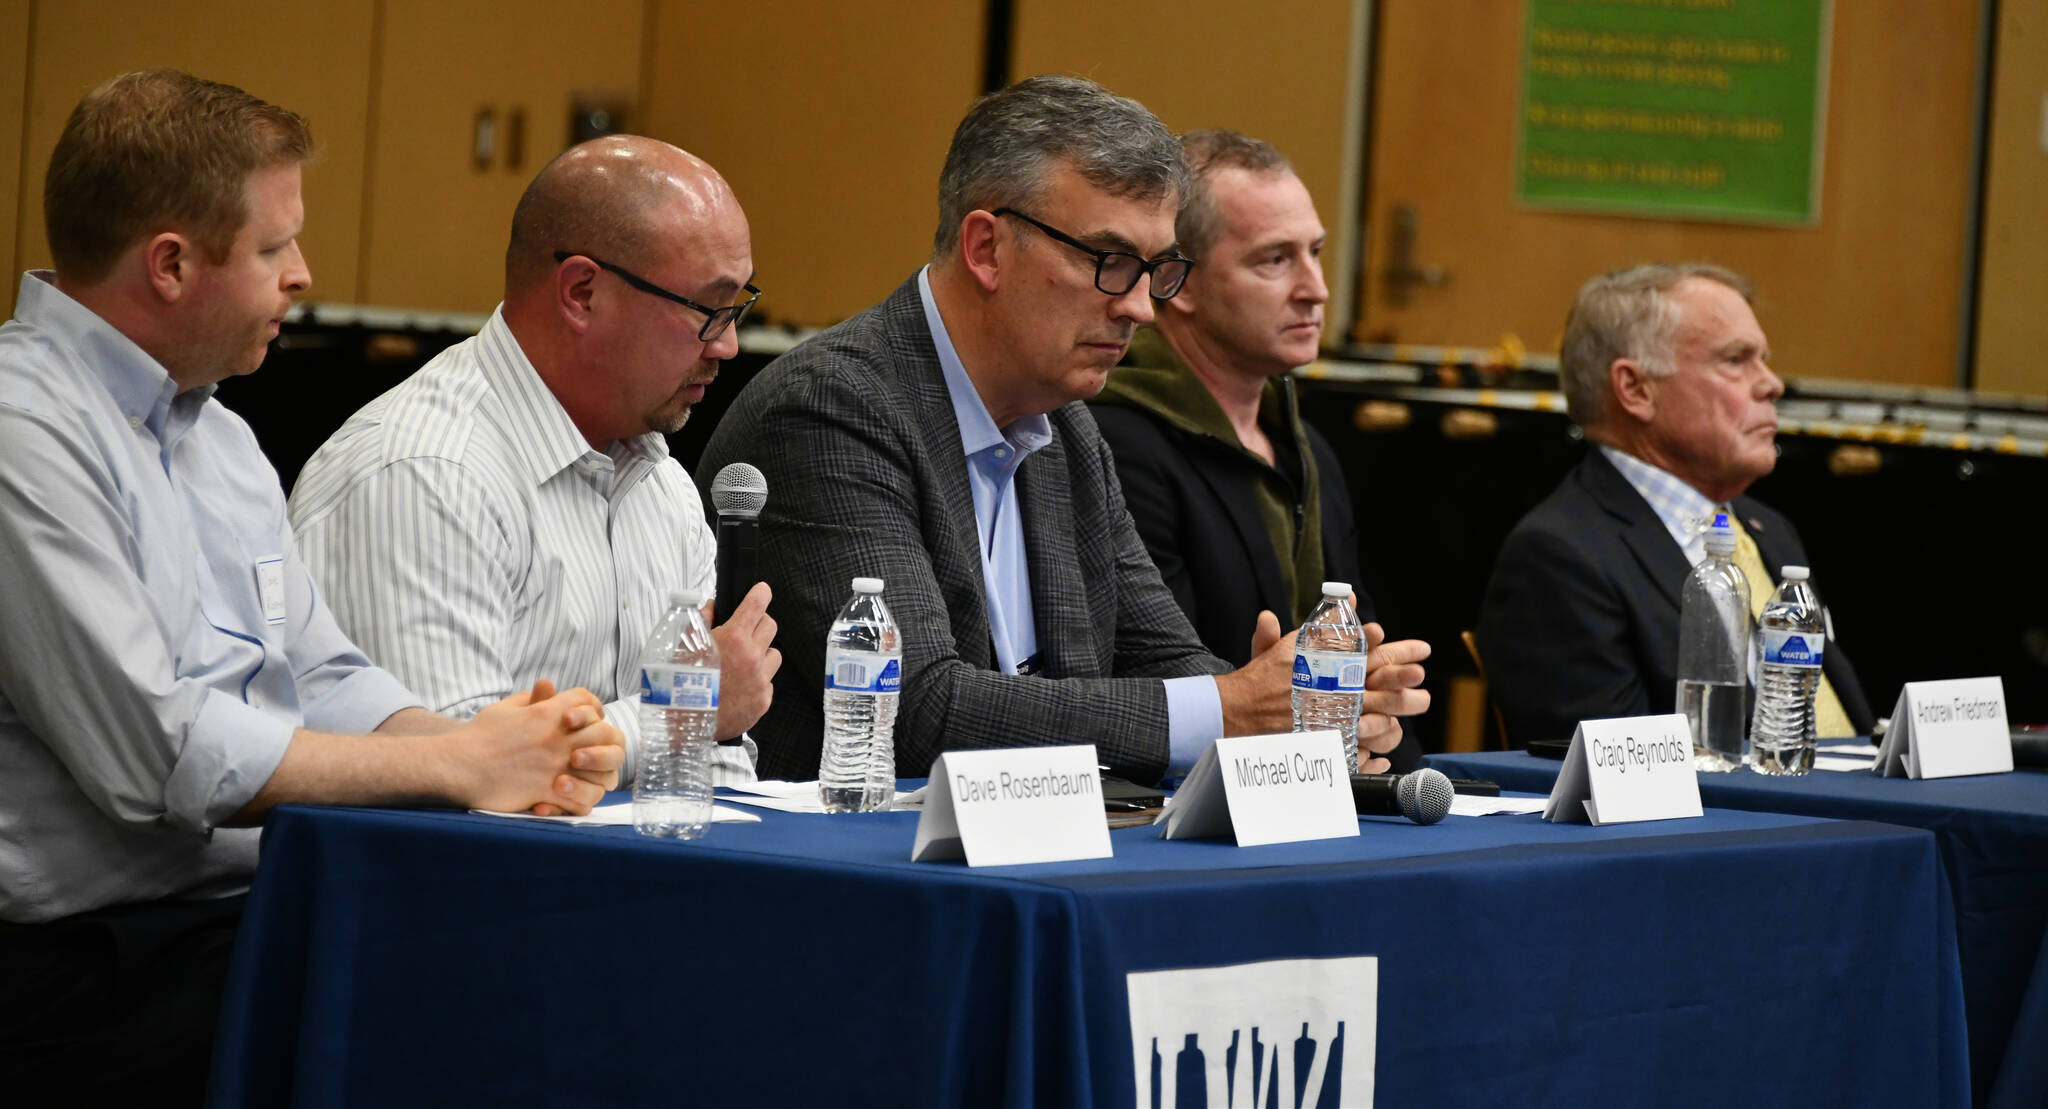 From left to right, city council candidates Dave Rosenbaum, Michael Curry, Craig Reynolds, Andrew Friedman and Jake Jacobson participate in a Mercer Island Candidate Forum on Oct. 18 at Islander Middle School. The League of Women Voters/Seattle King County, the Mercer Island Preschool Association and the Mercer Island PTA hosted the forum, which drew about 70 attendees. Wendy Weiker couldn’t attend because of a family commitment and provided a candidacy statement that the moderator read to the crowd. Andy Nystrom/ staff photo